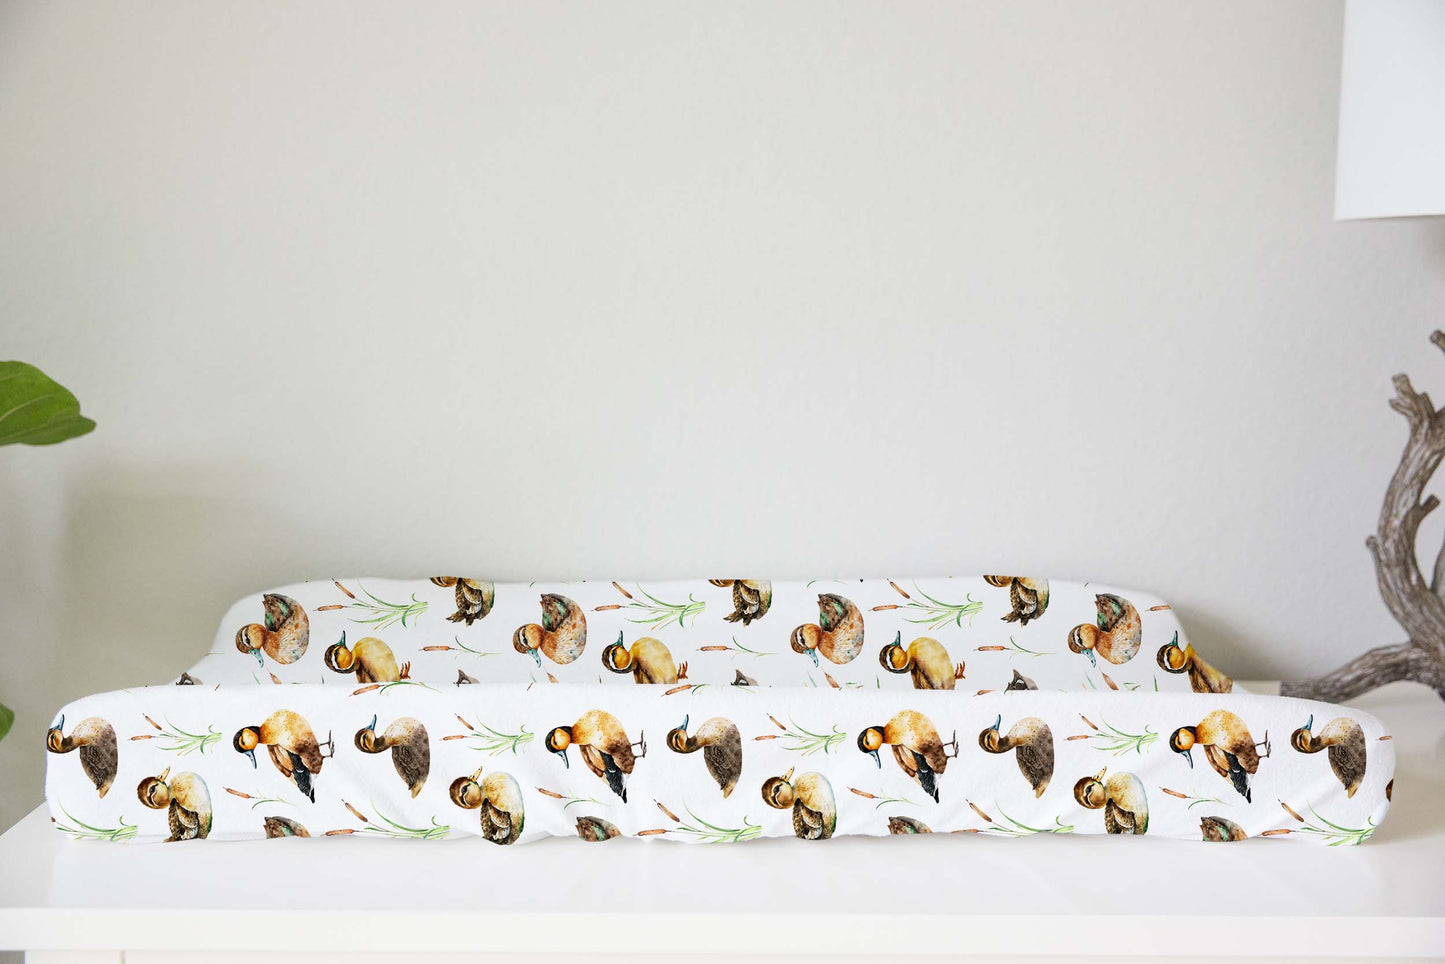 Ducks Baby Changing Pad Cover, Duck nursery decor - Little Ducklings